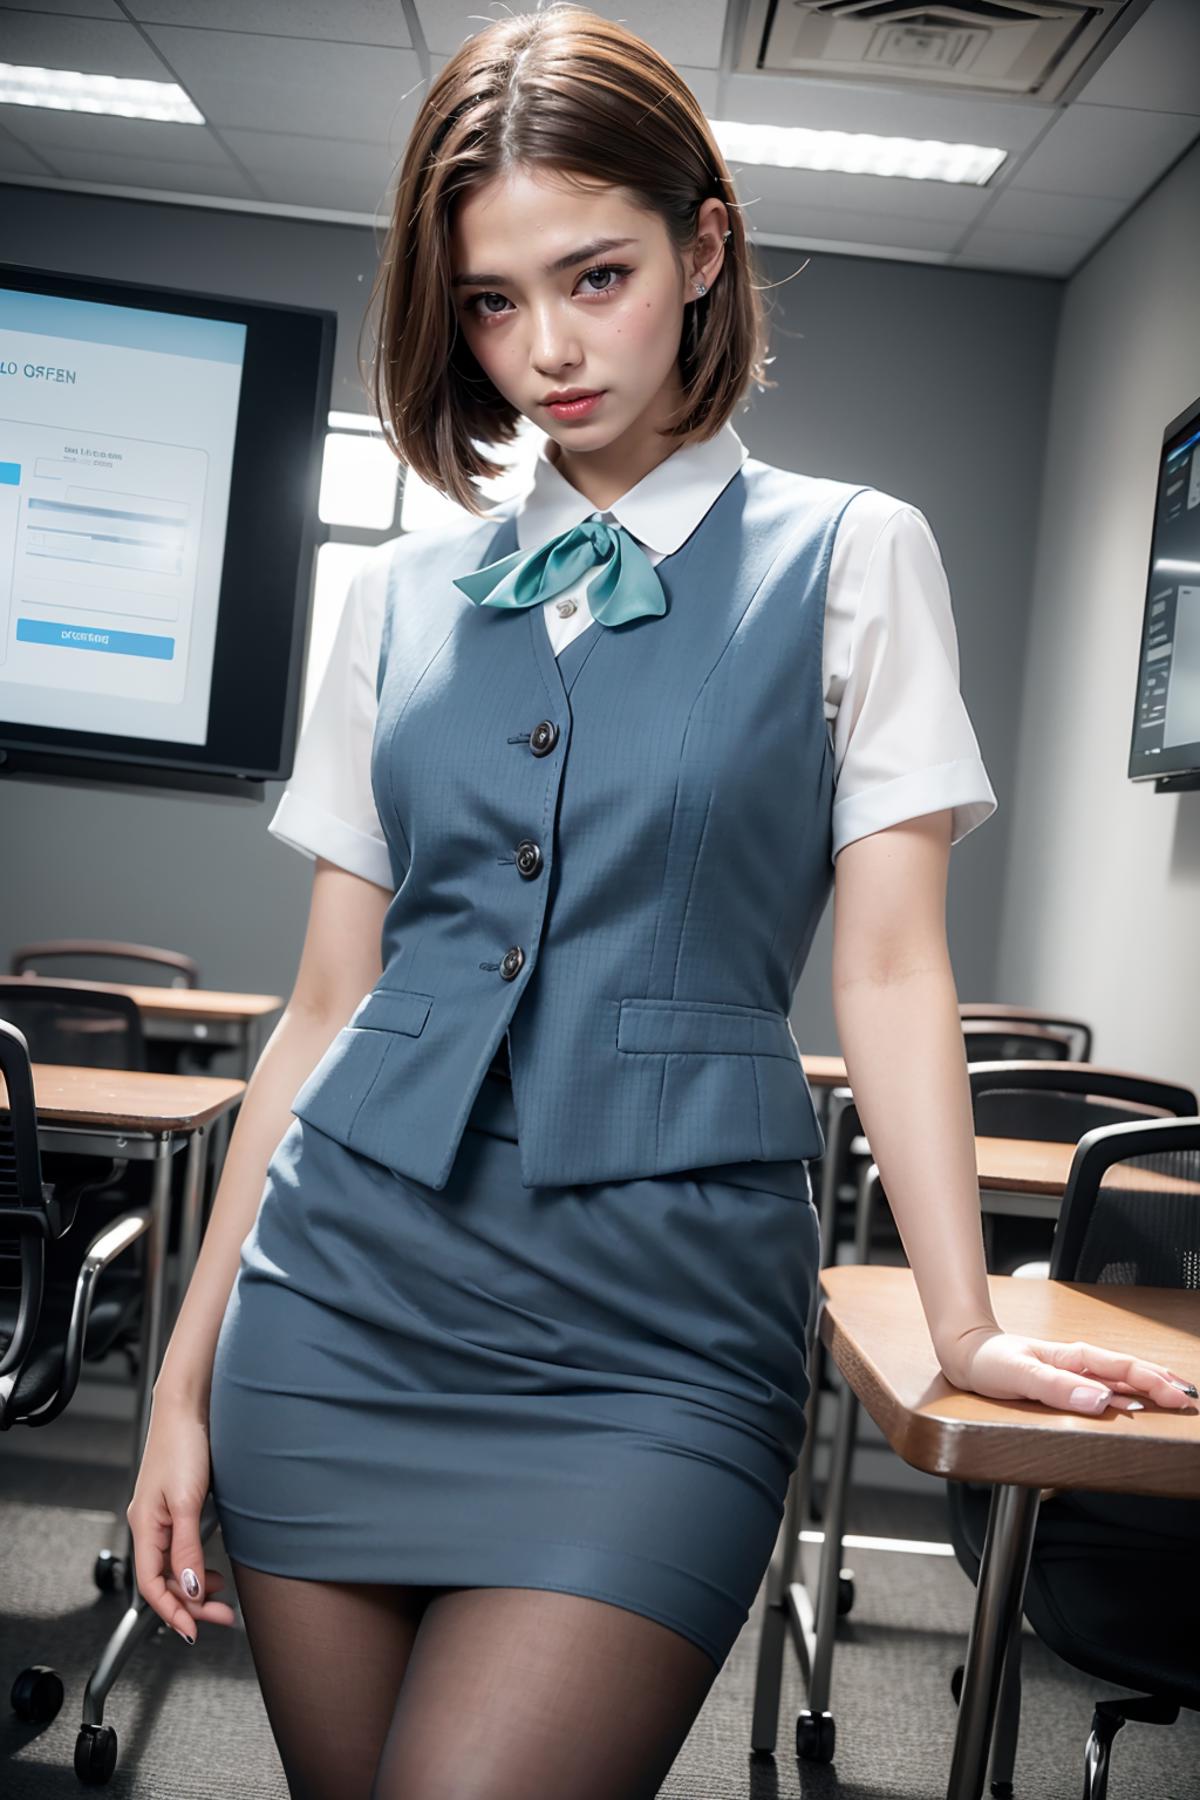 Sexy Office Lady image by feetie